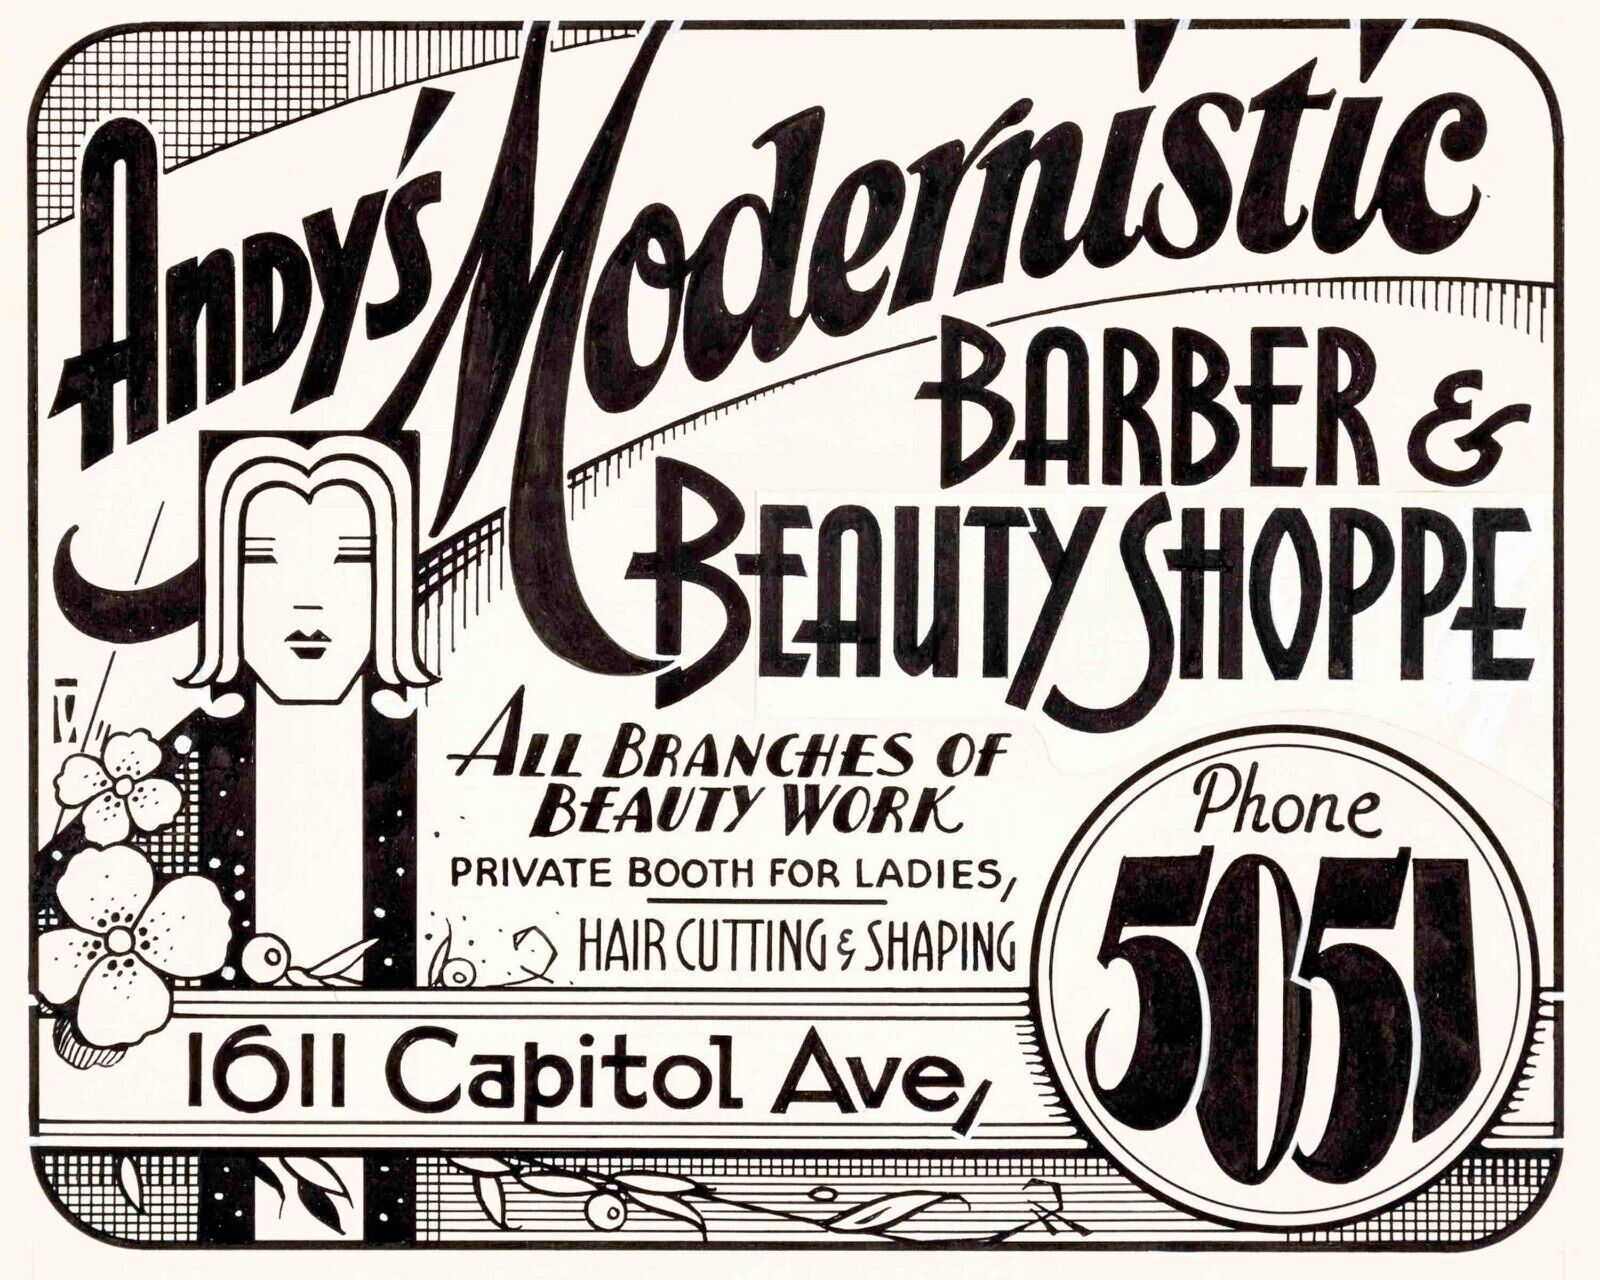 Andy Barber Shop Advertising early 1900s  Computer Mouse Pad  7 x 9